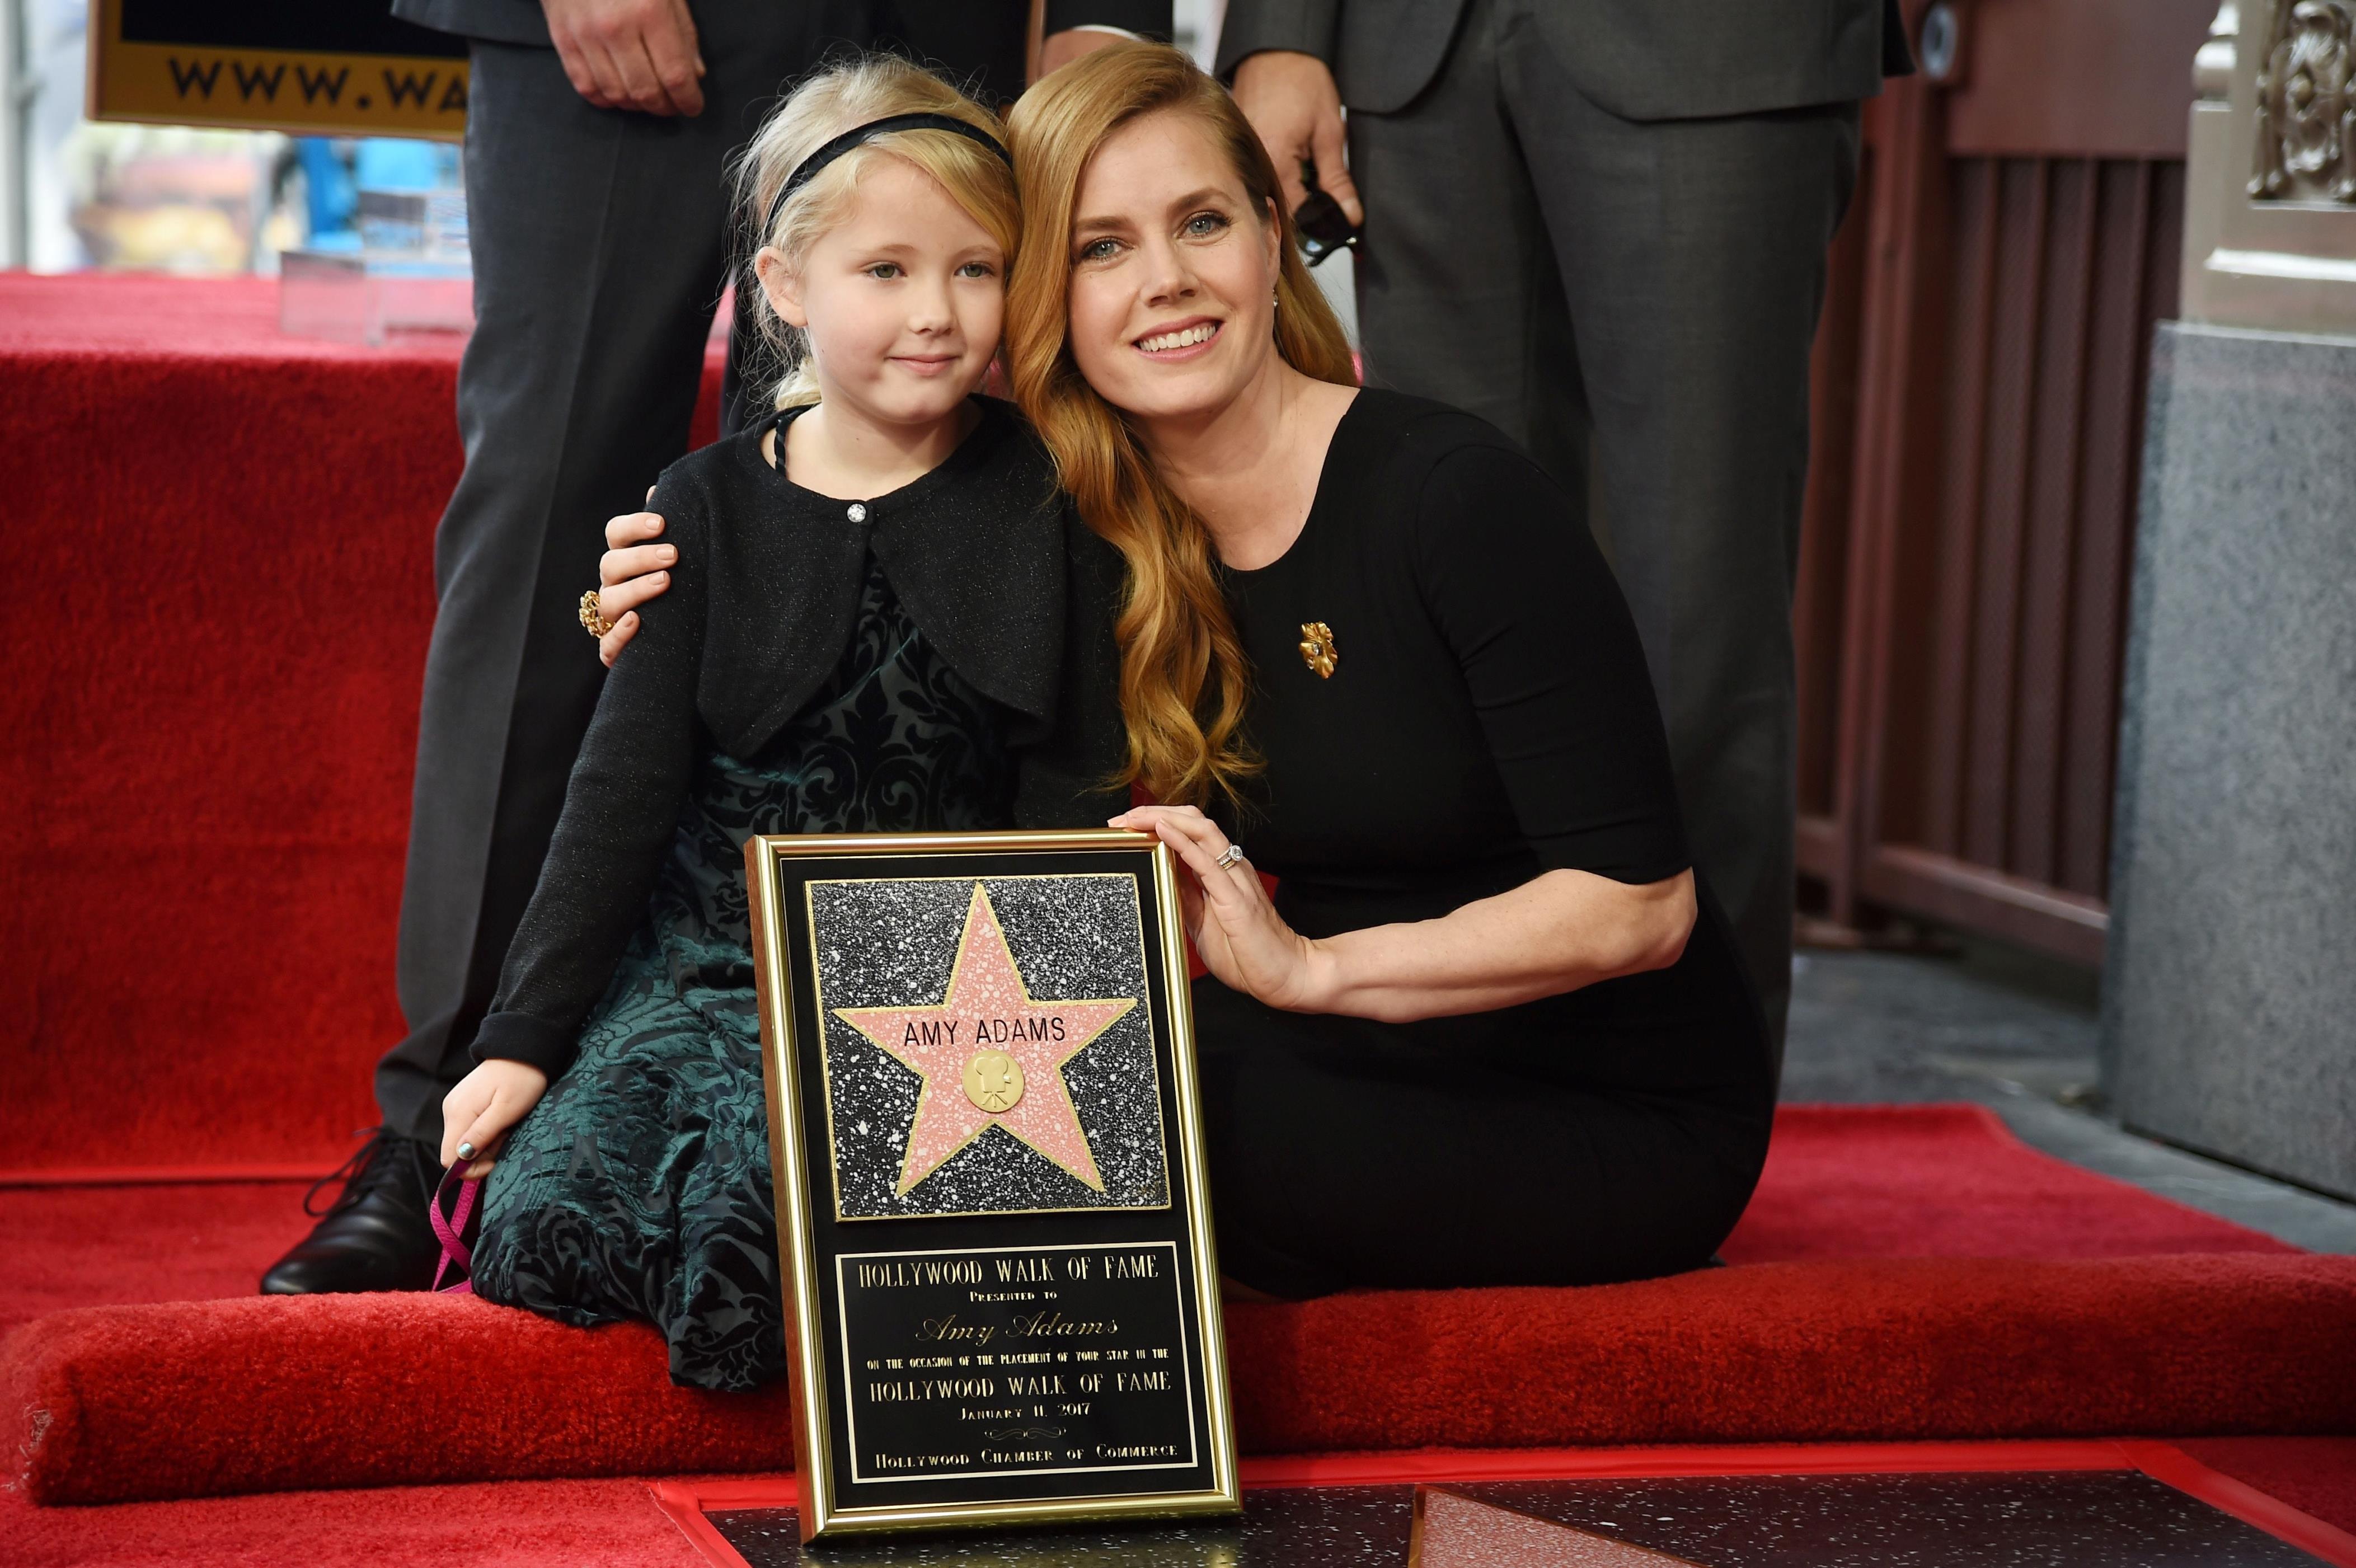 Amy Adams shared a sweet moment with her daughter Aviana during her unveiling ceremony in January 2017.